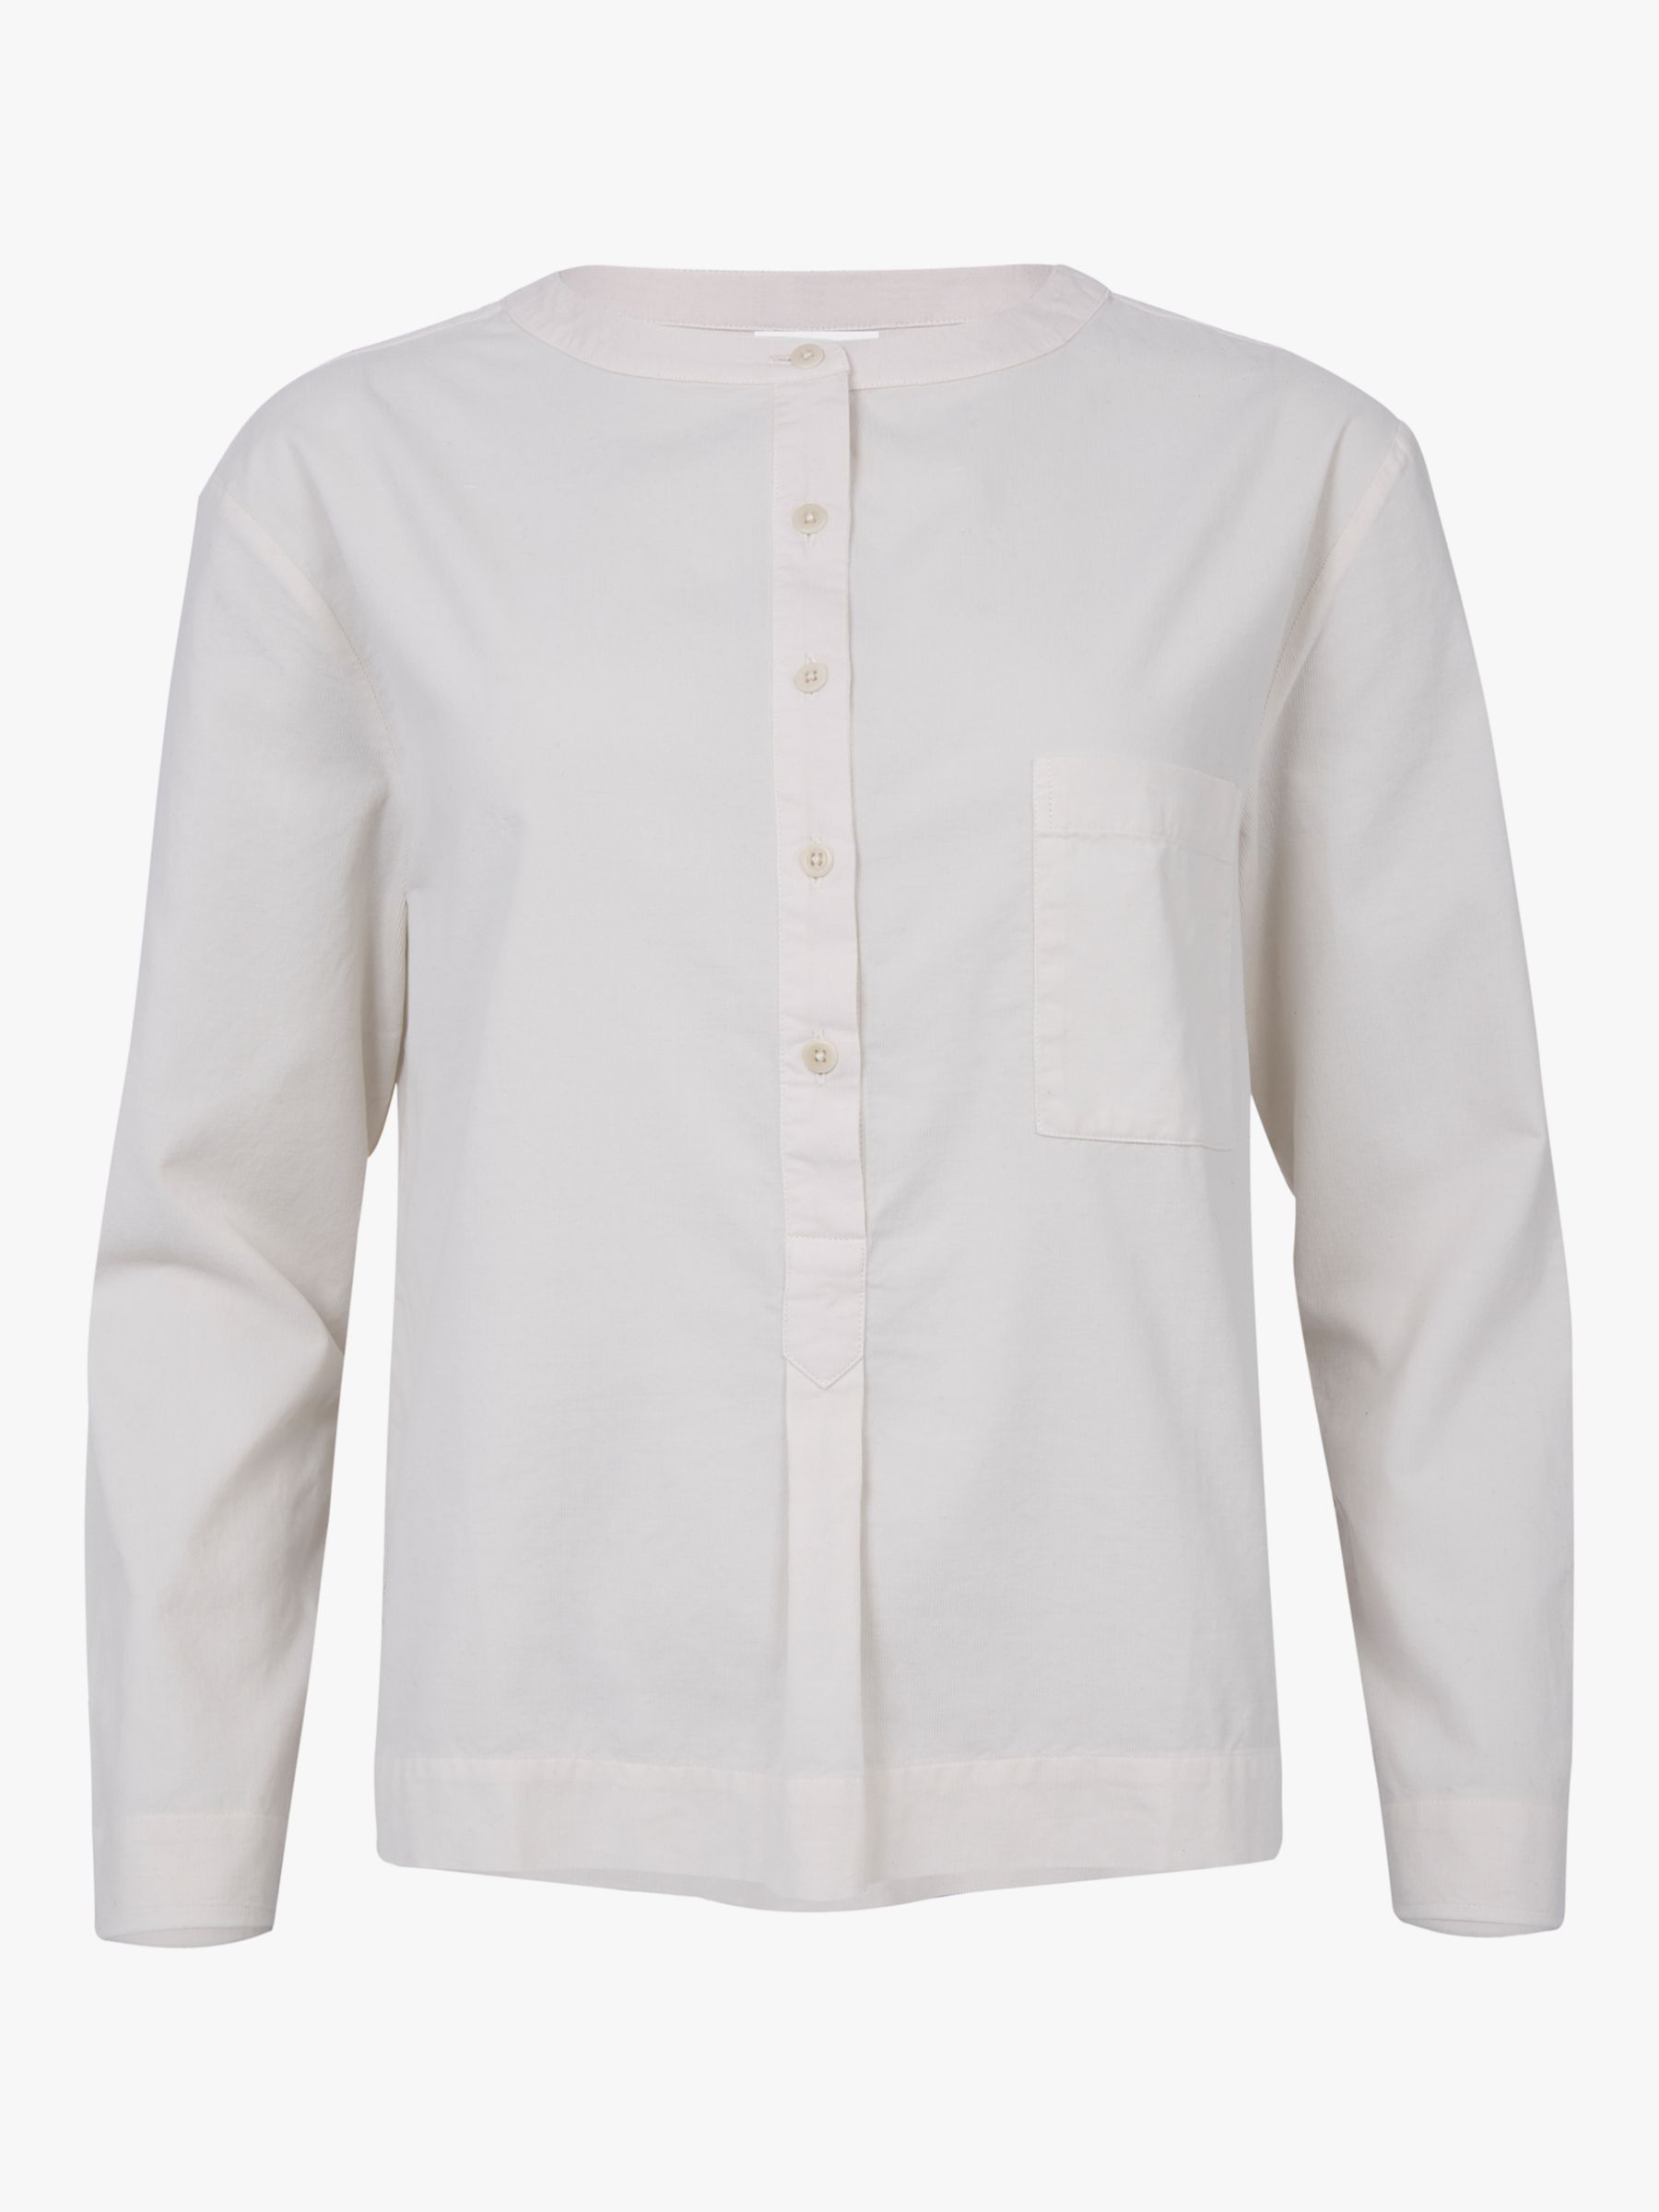 Buy Celtic & Co. Baby Cord Henley Top, Chalk Online at johnlewis.com